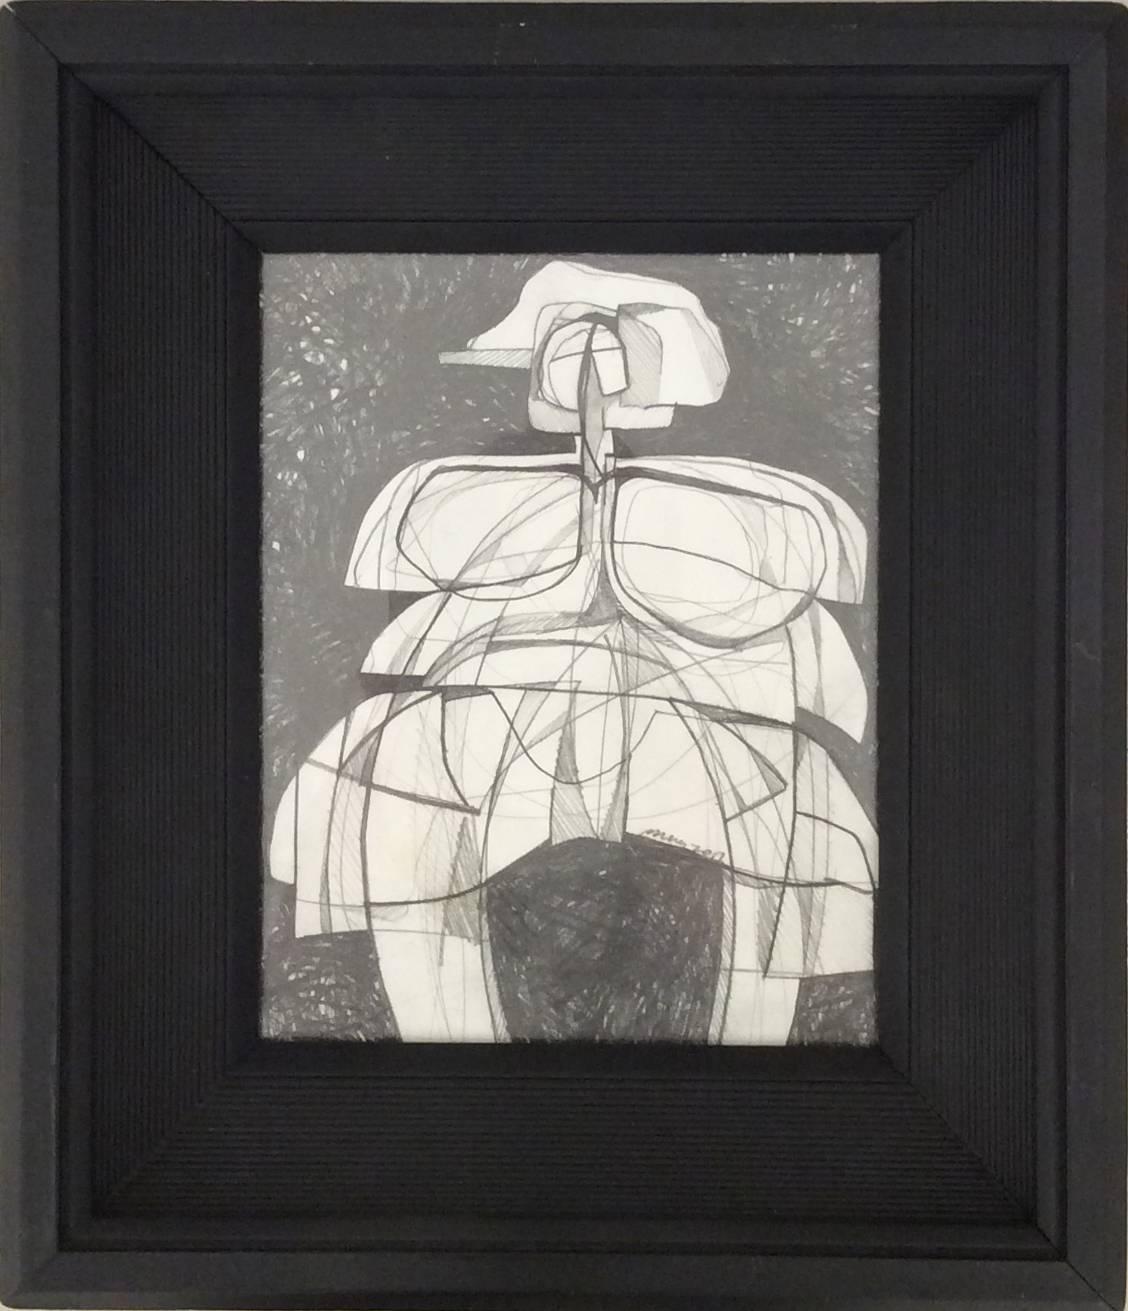 David Dew Bruner Abstract Drawing - Infanta LI (Small Abstract Cubist Graphite Drawing in Vintage Black Frame)